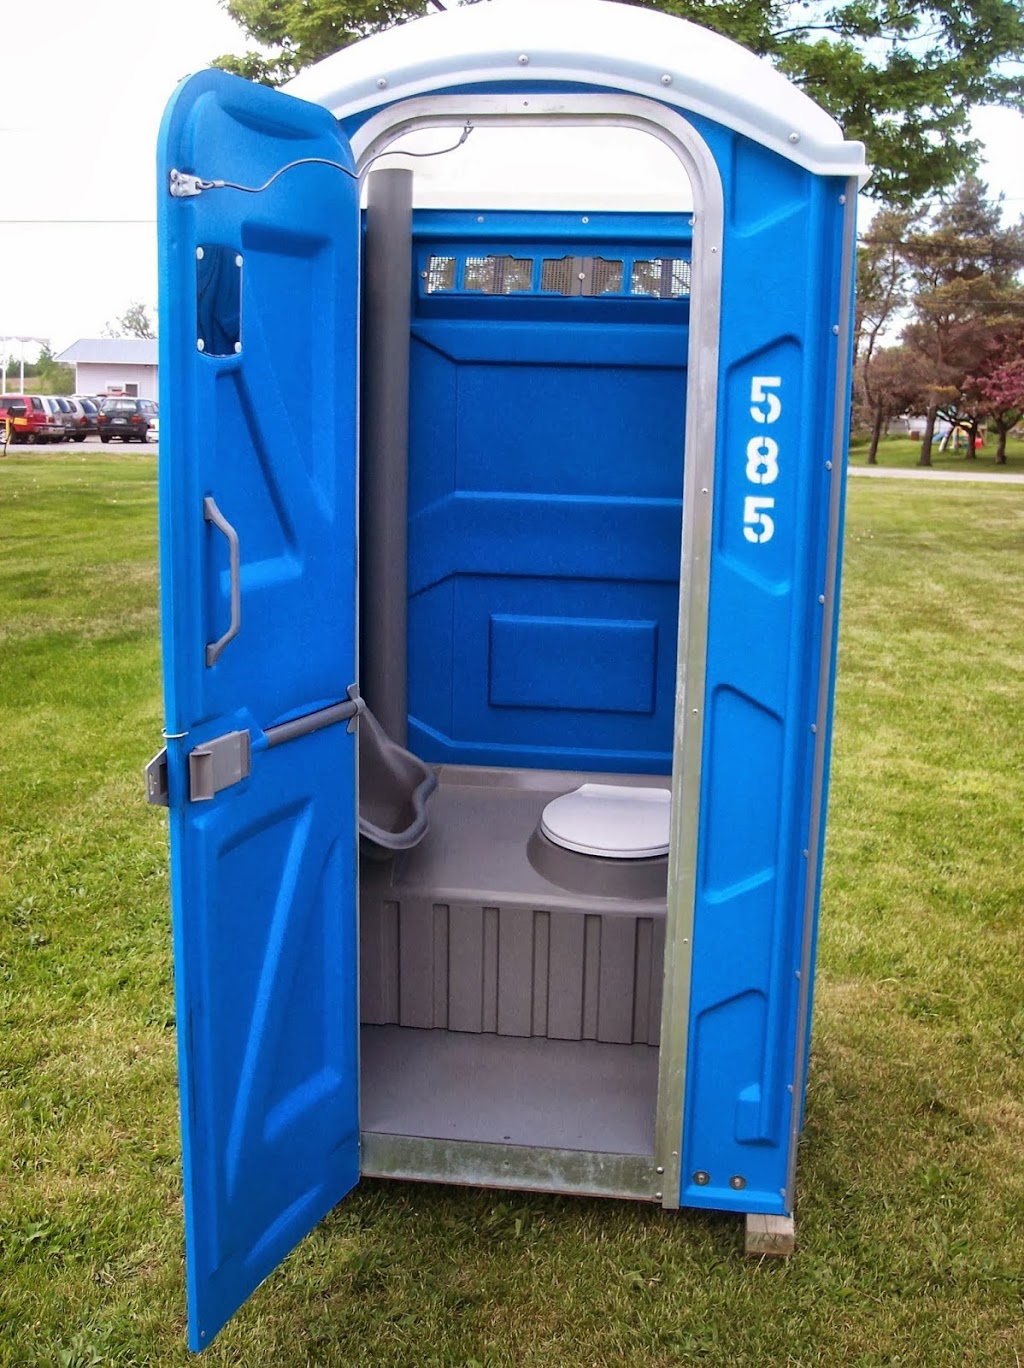 Campbells Portable Toilets | 5463 ON-6, Guelph, ON N1H 6J2, Canada | Phone: (519) 822-1521